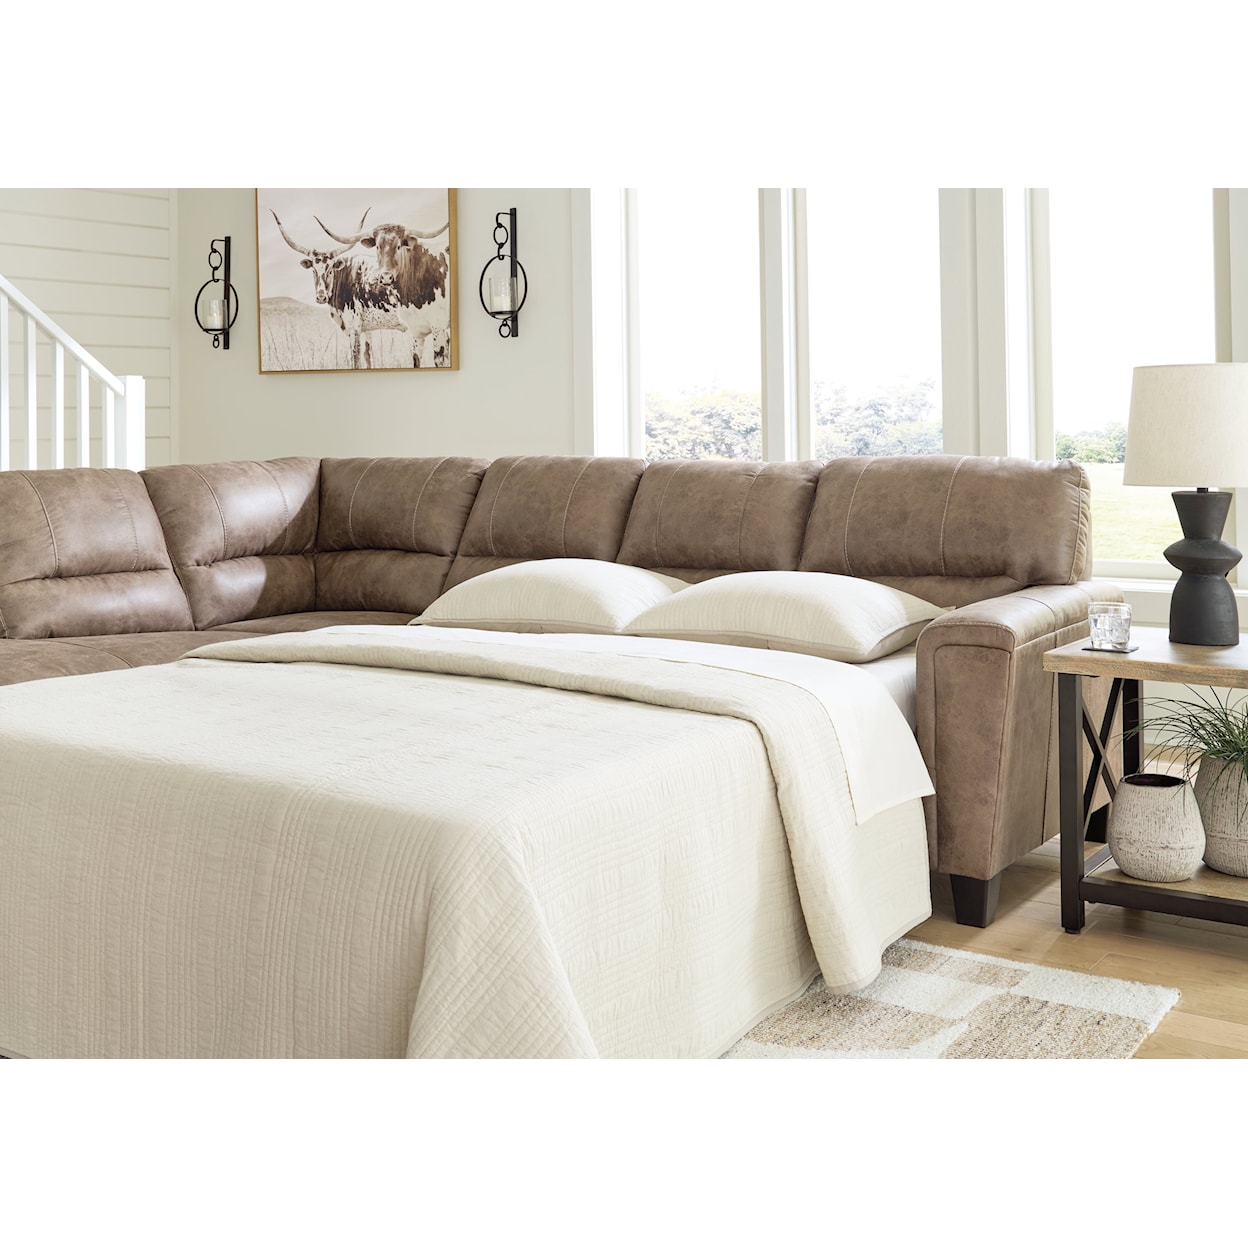 Signature Design by Ashley Navi 2-Piece Sectional w/ Sleeper and Chaise